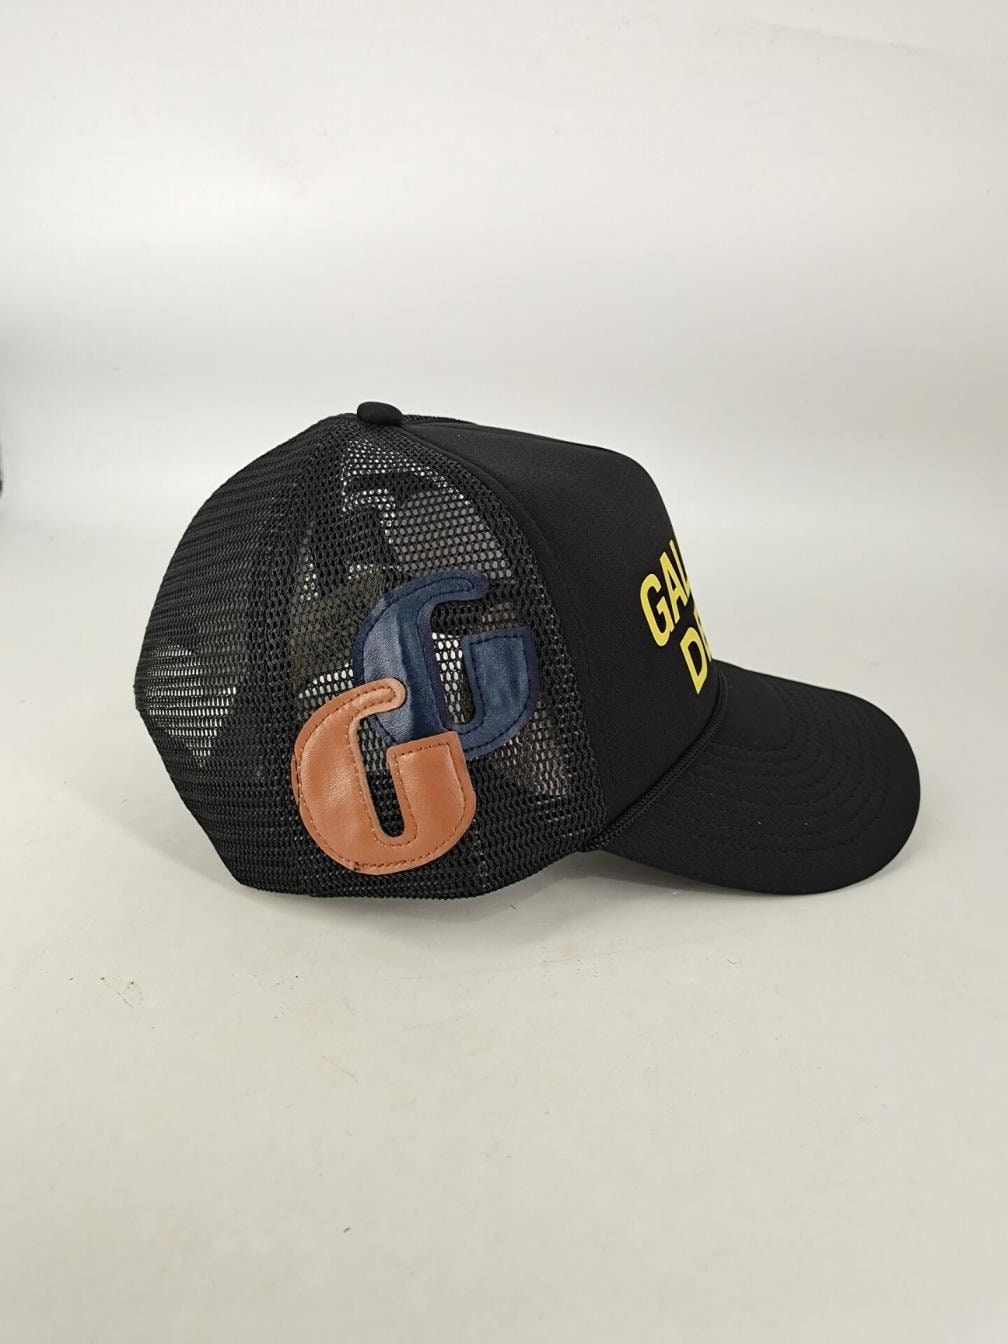 Outlet-Schnäppchen Gallery Dept. Yellow G Letter Dad Hats Club Logo Black 5 Hat Snapback - Hypebeast Panel Men Brand Mesh Trucker for New Etsy Patch